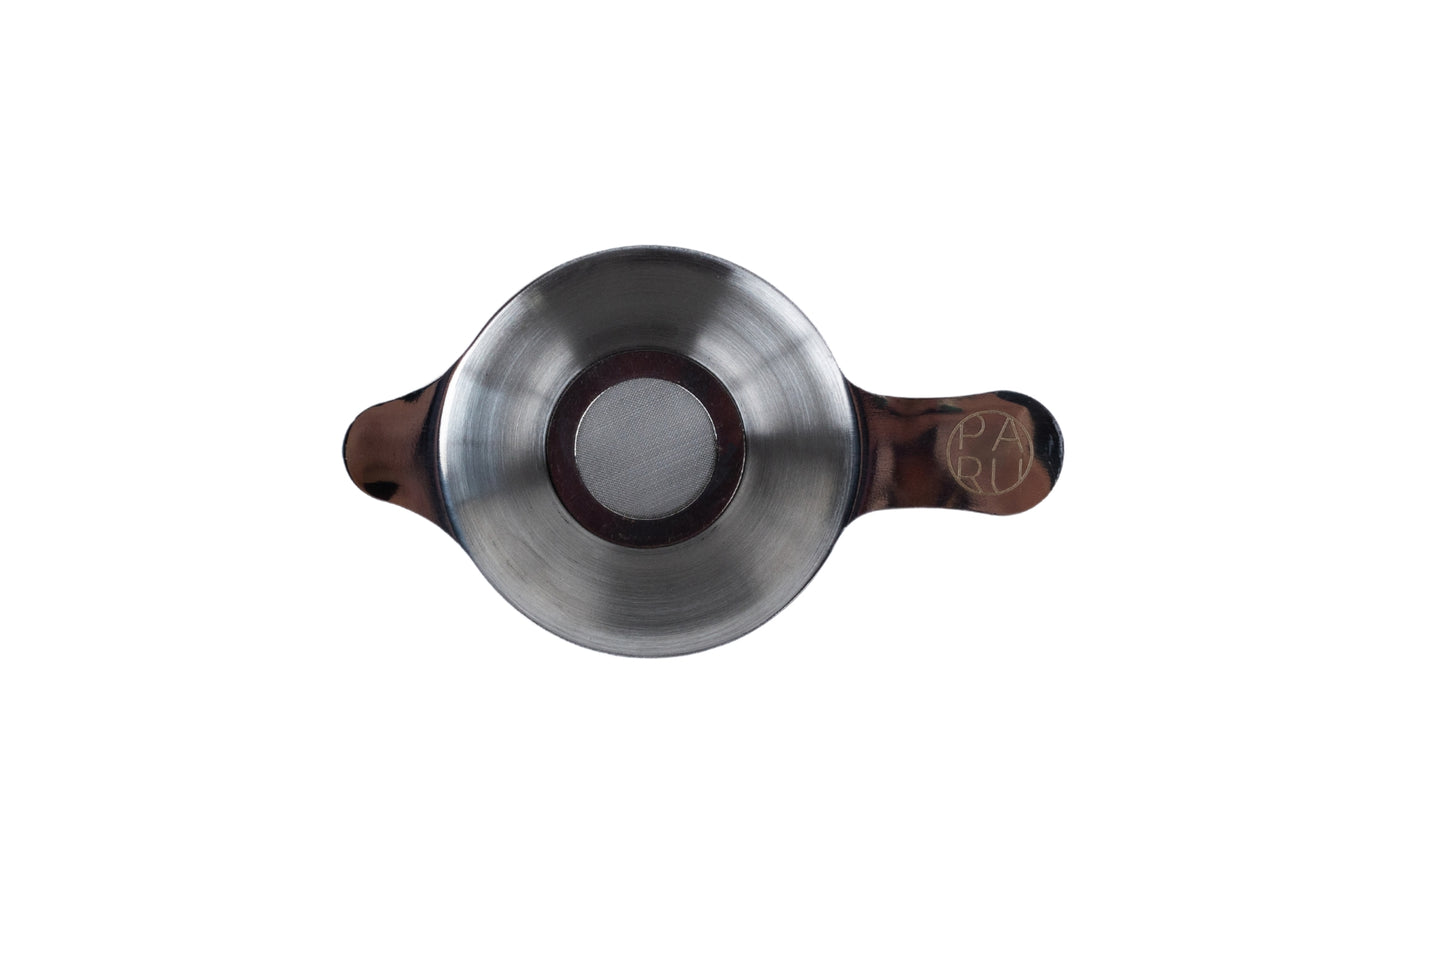 Gong Fu Stainless Steel Strainer